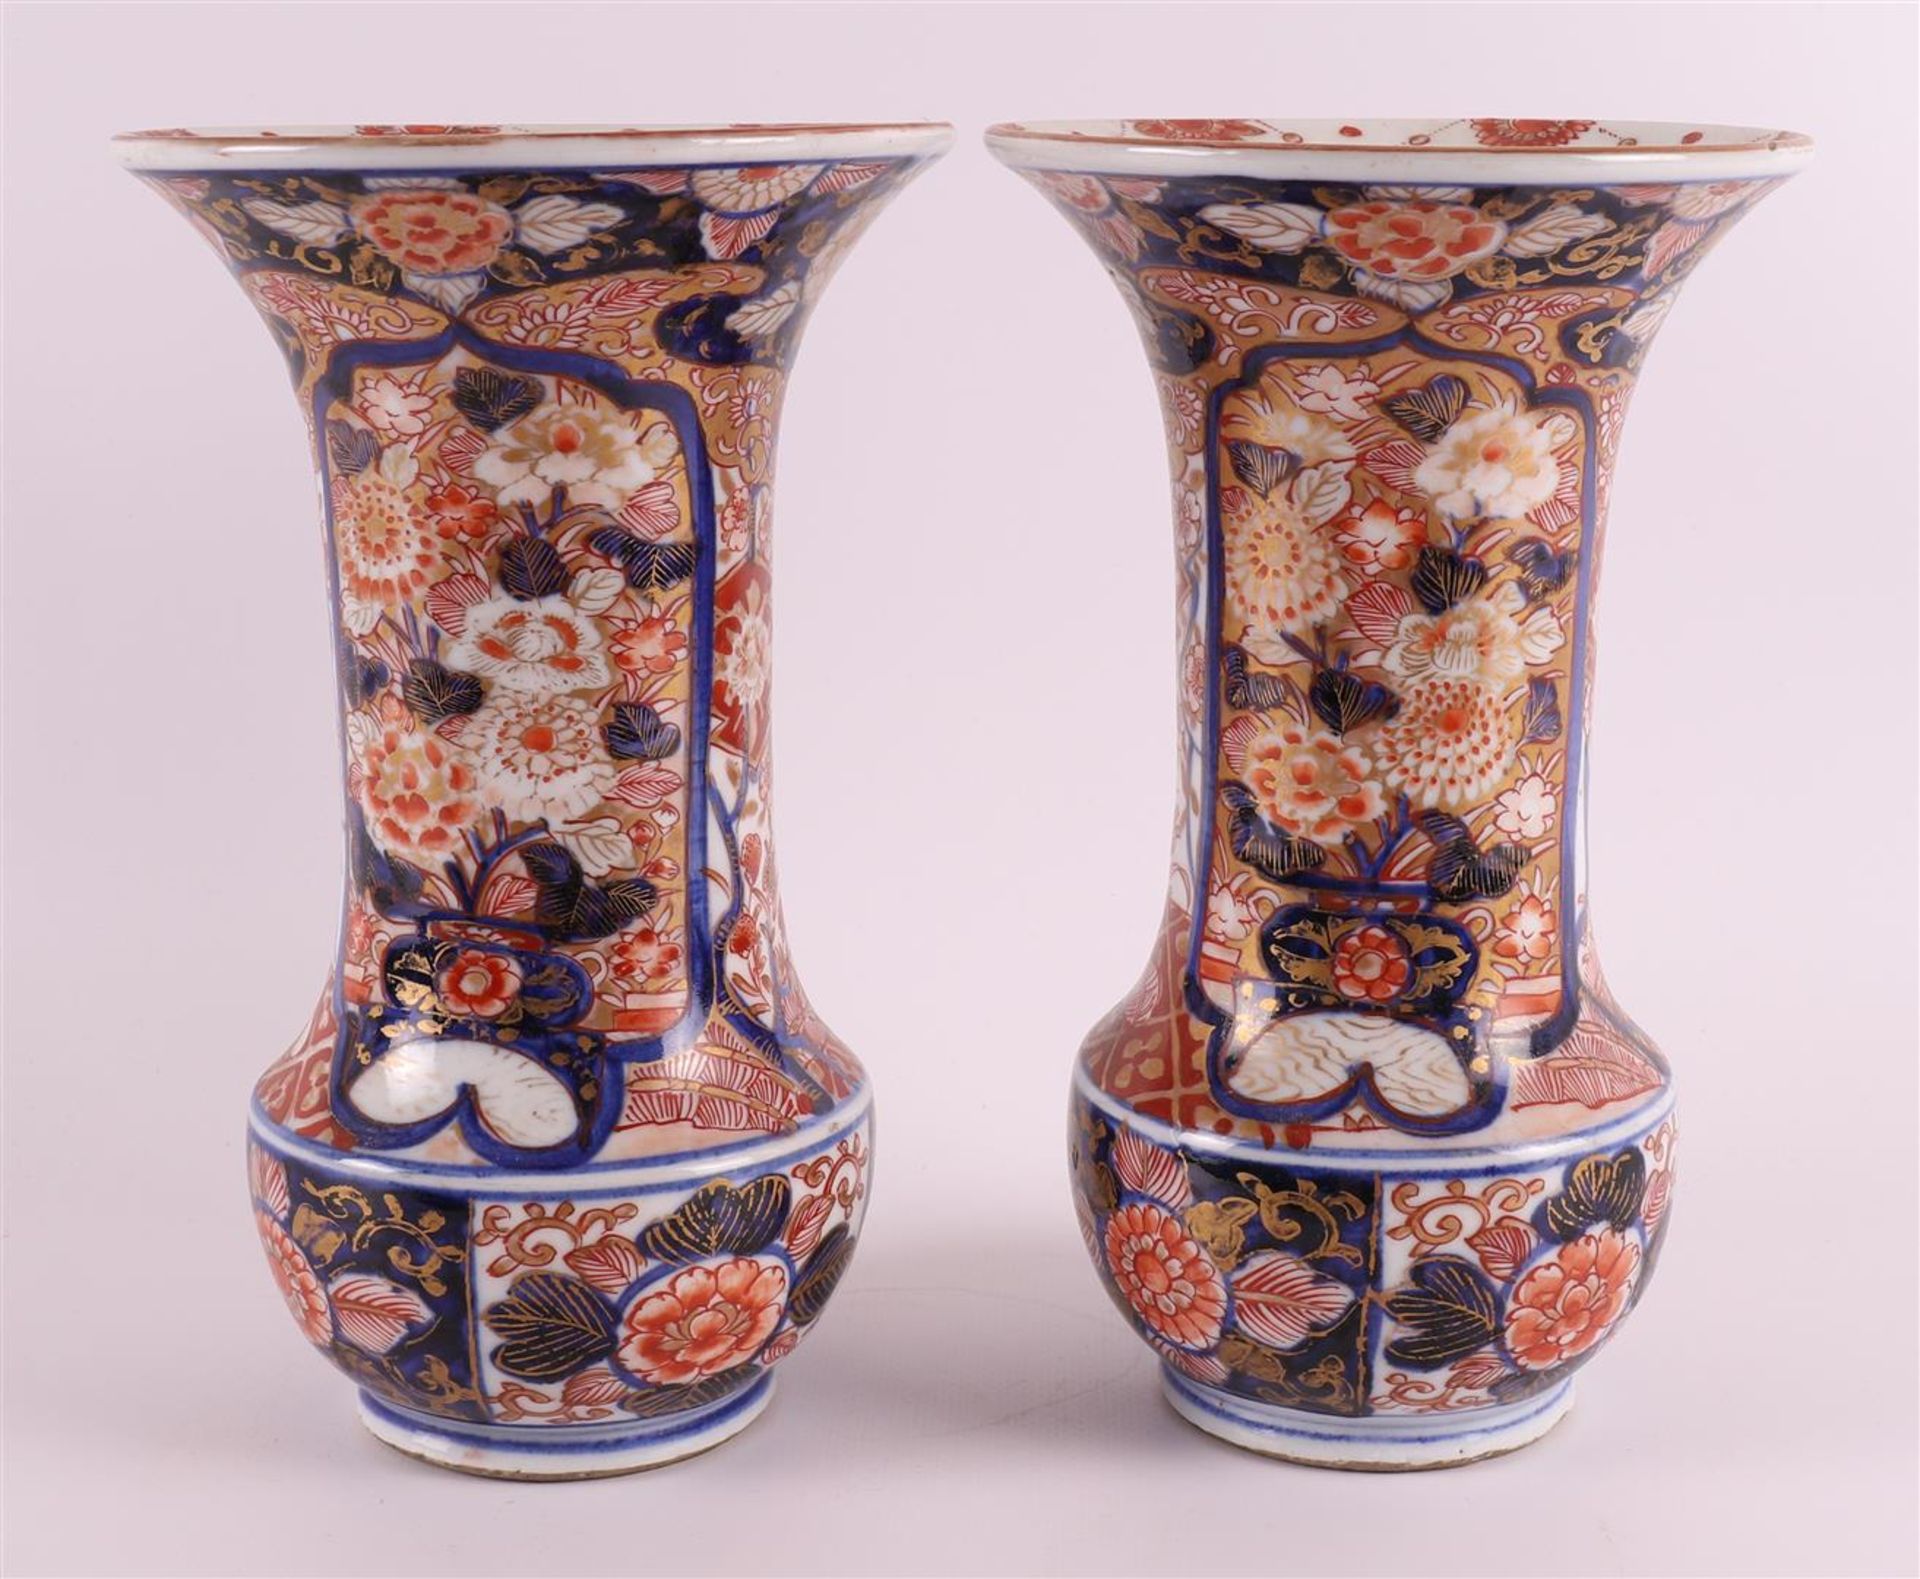 A five-piece porcelain Imari cabinet set, consisting of: three lidded vases and two vases with - Image 14 of 17